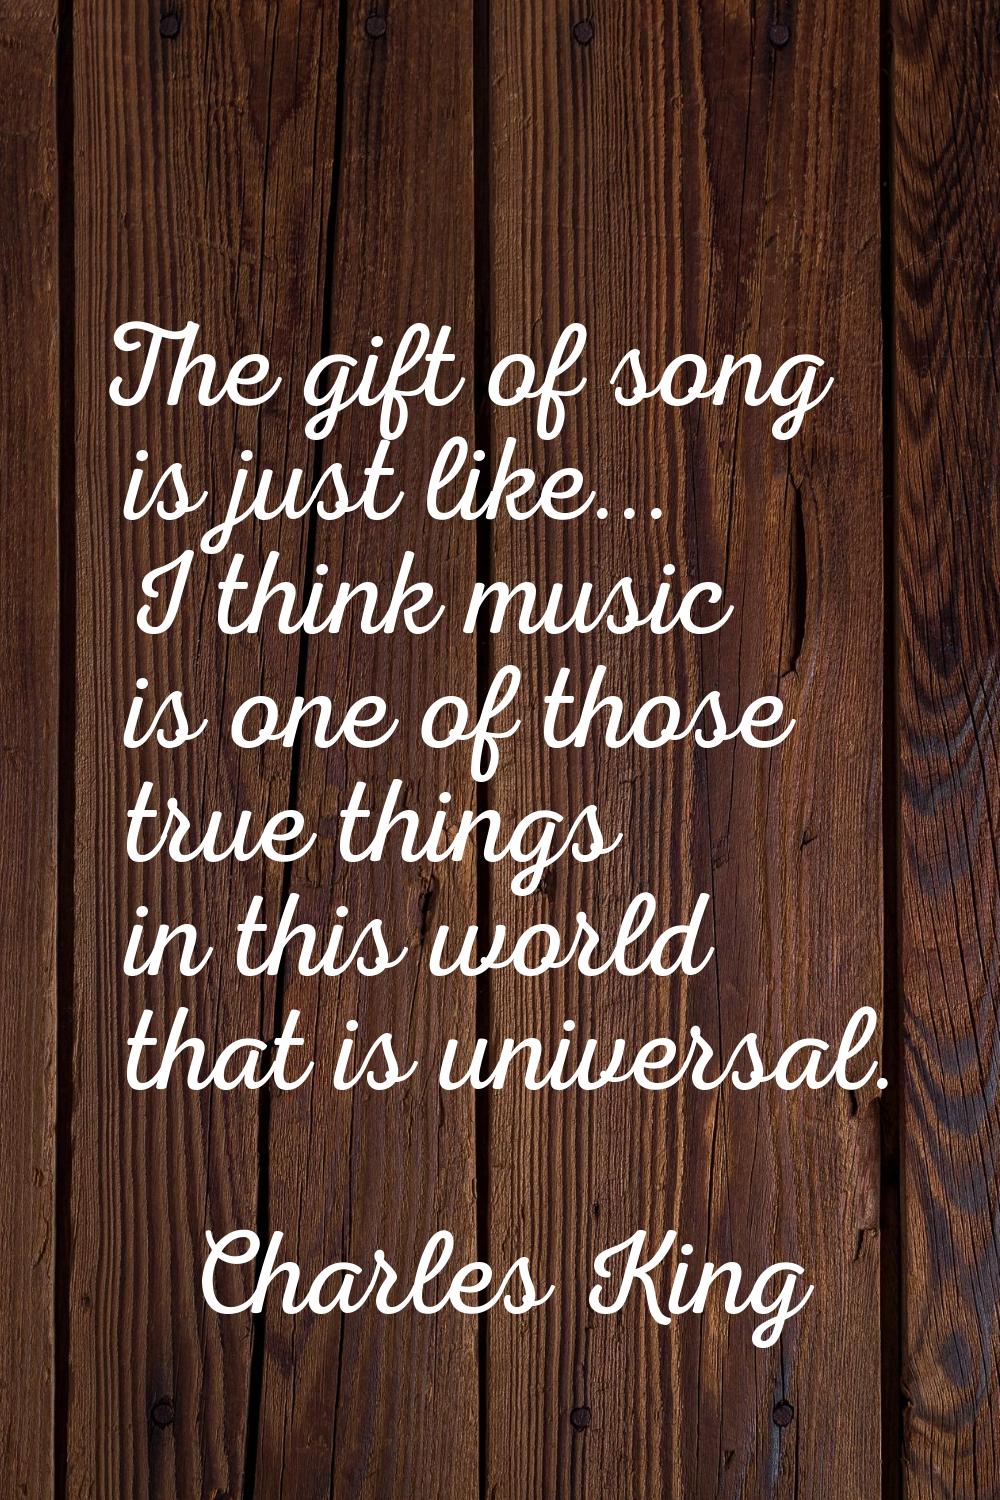 The gift of song is just like... I think music is one of those true things in this world that is un